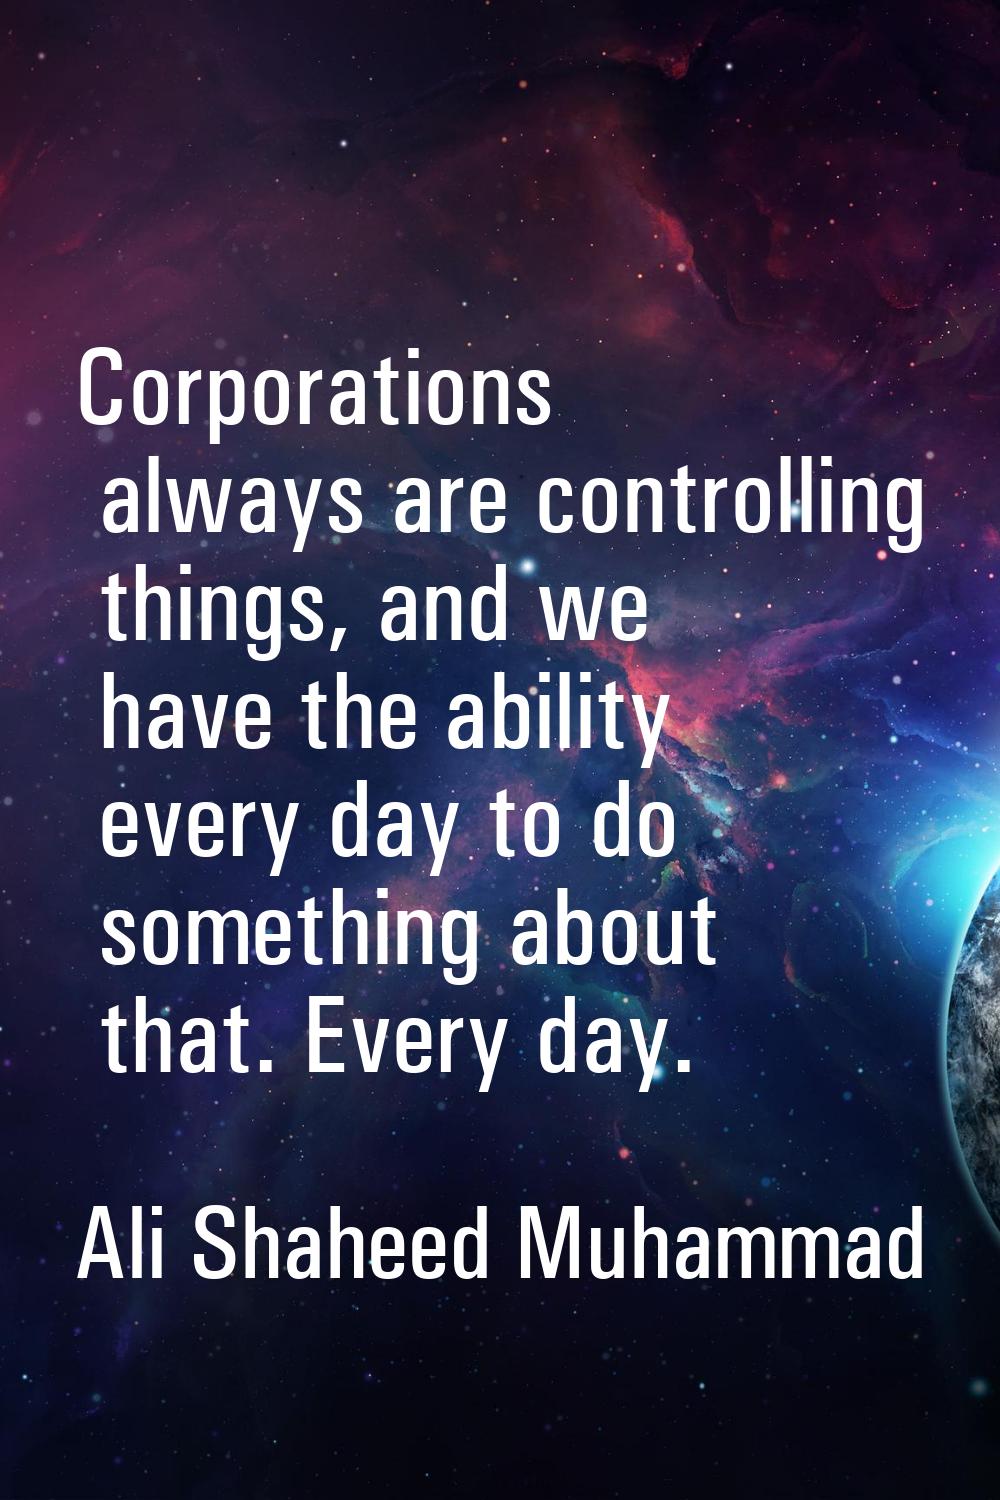 Corporations always are controlling things, and we have the ability every day to do something about